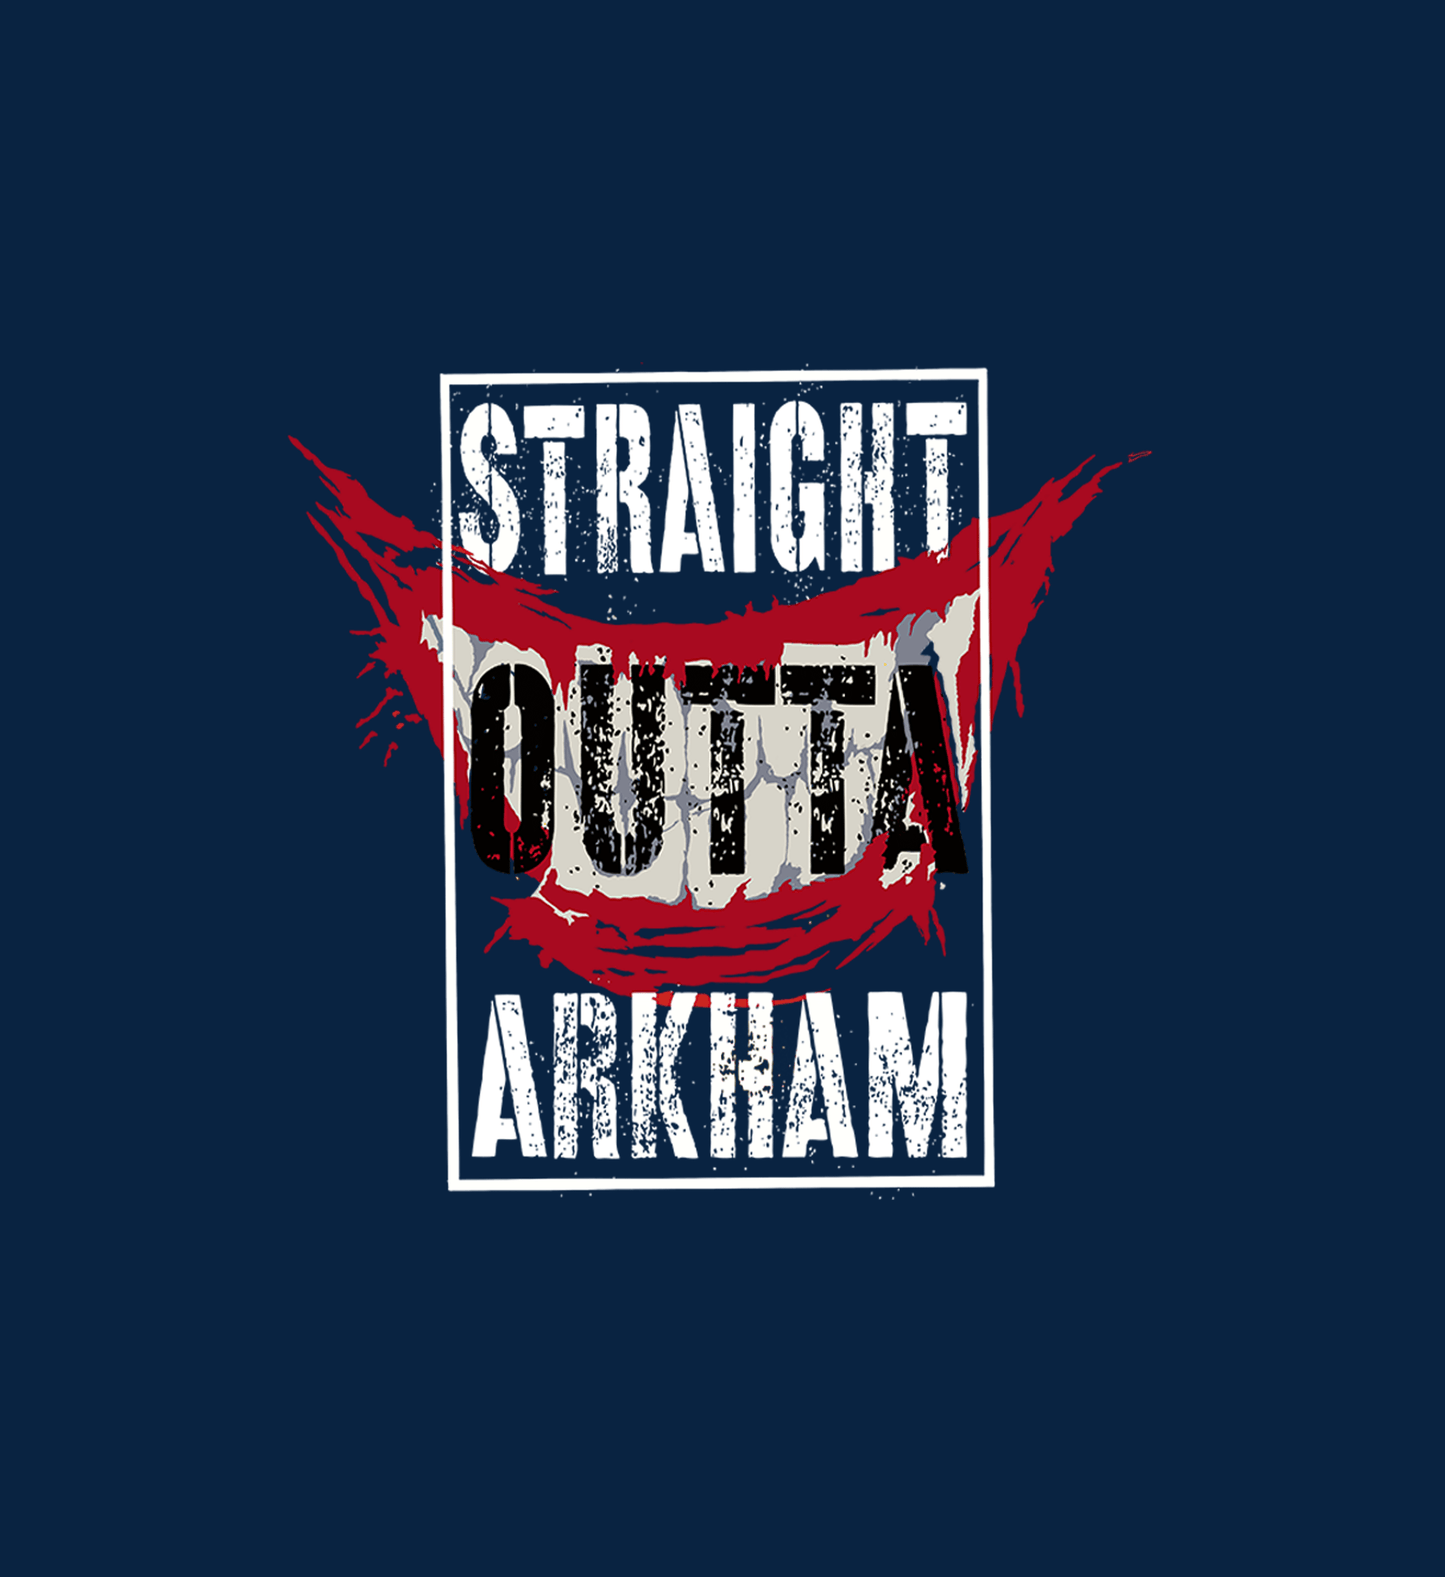 " STAY OUT OF ARKHAM " - WINTER HOODIES